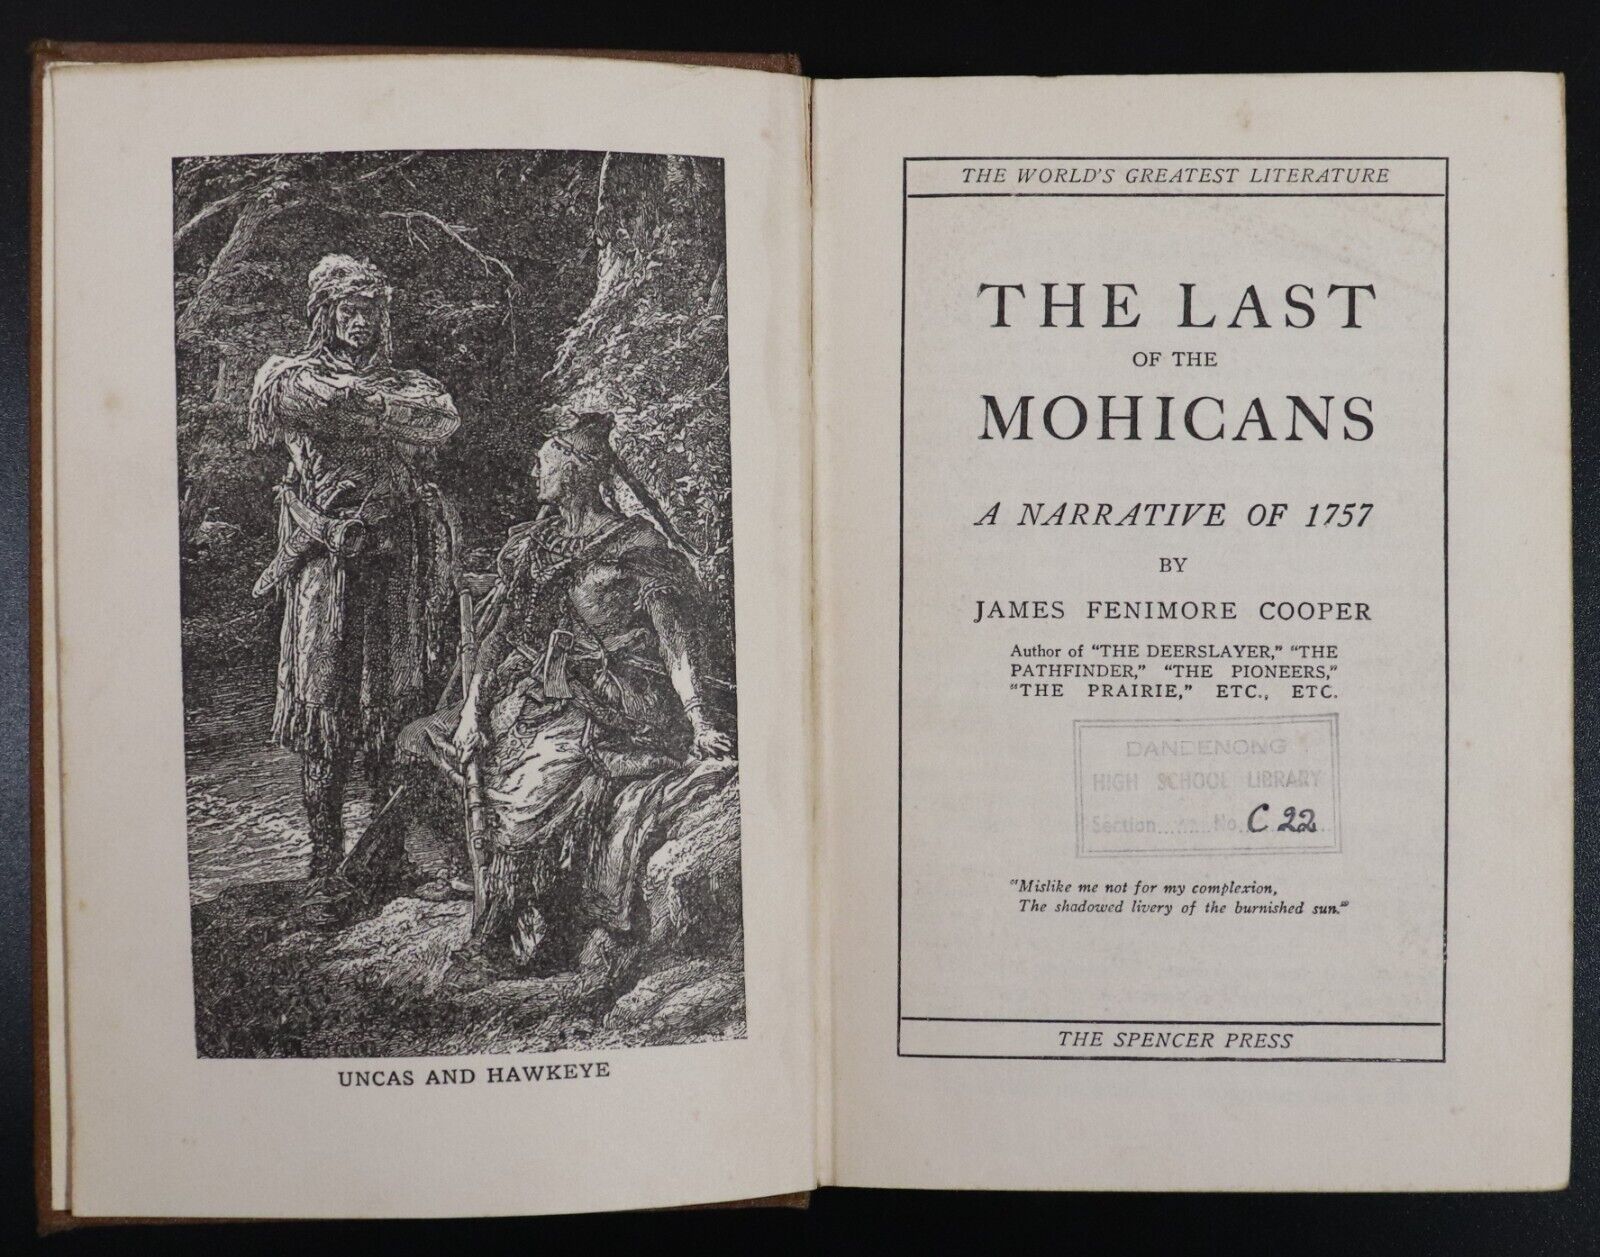 c1936 The Last Of The Mohicans by J.F. Cooper Antique American Fiction Book - 0